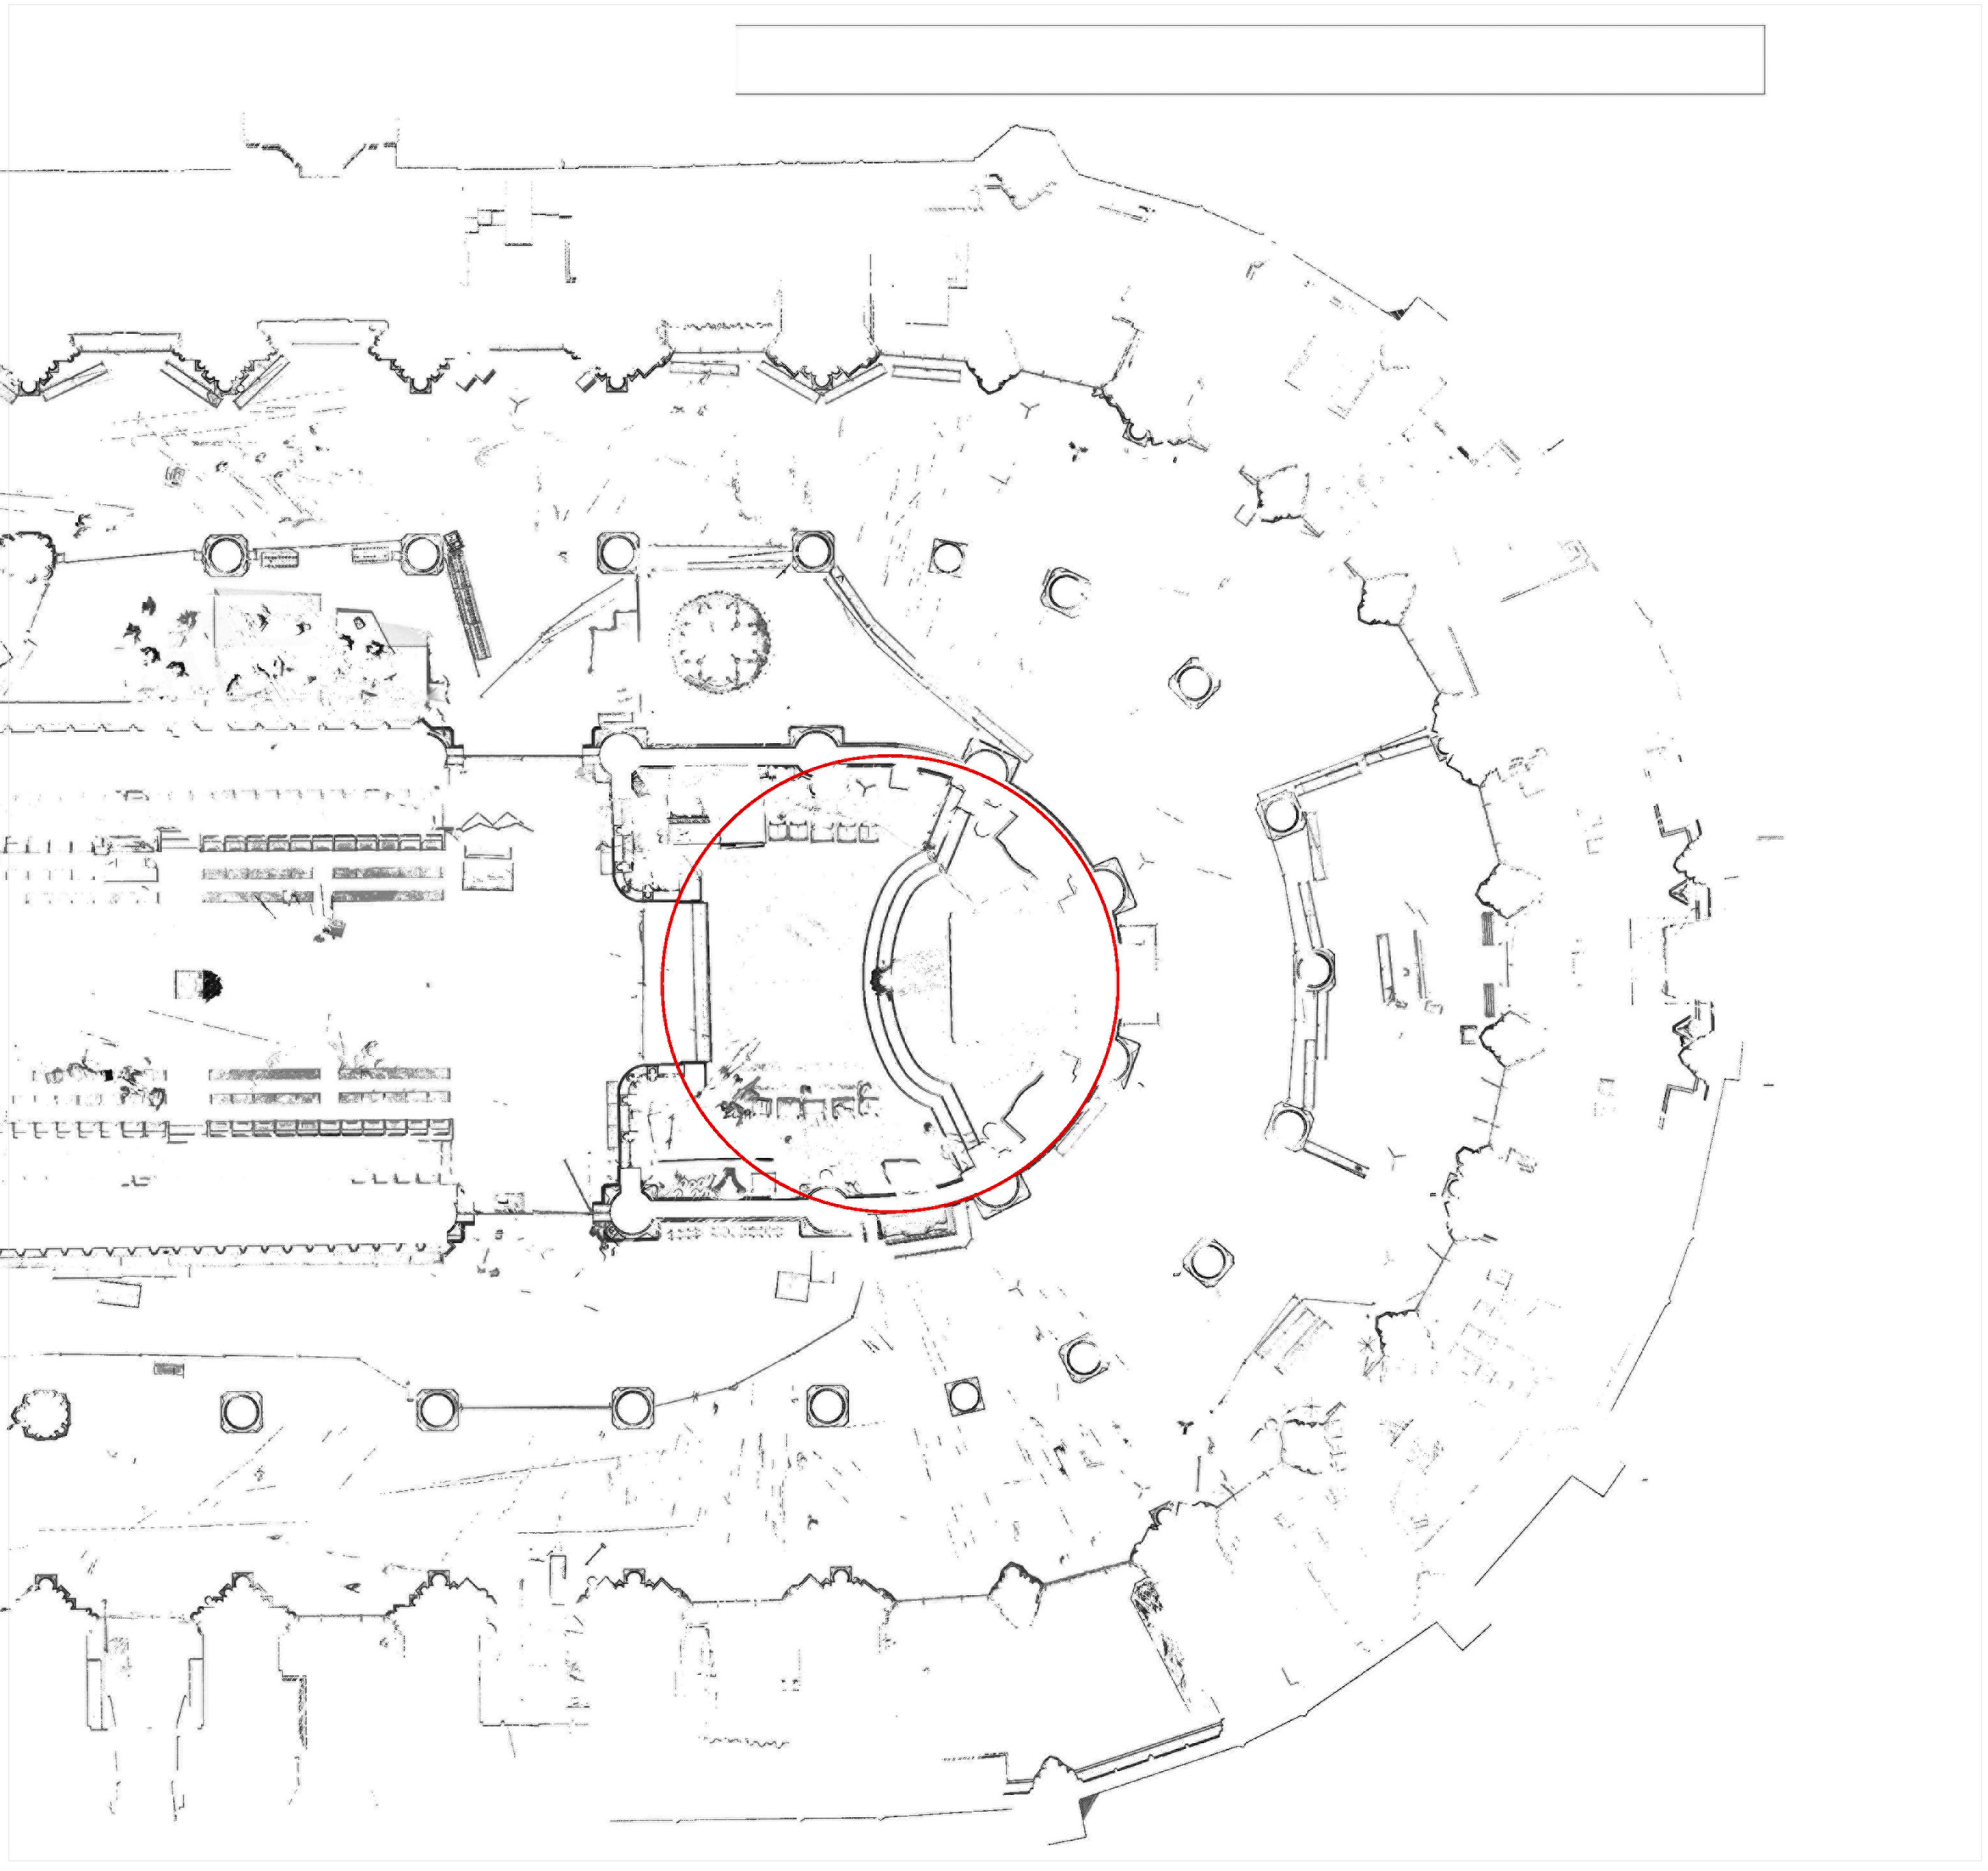 Partial plan of Notre-Dame in Paris, according to laser scan data by Andrew Tallon, showing circular construction of hemicycle.